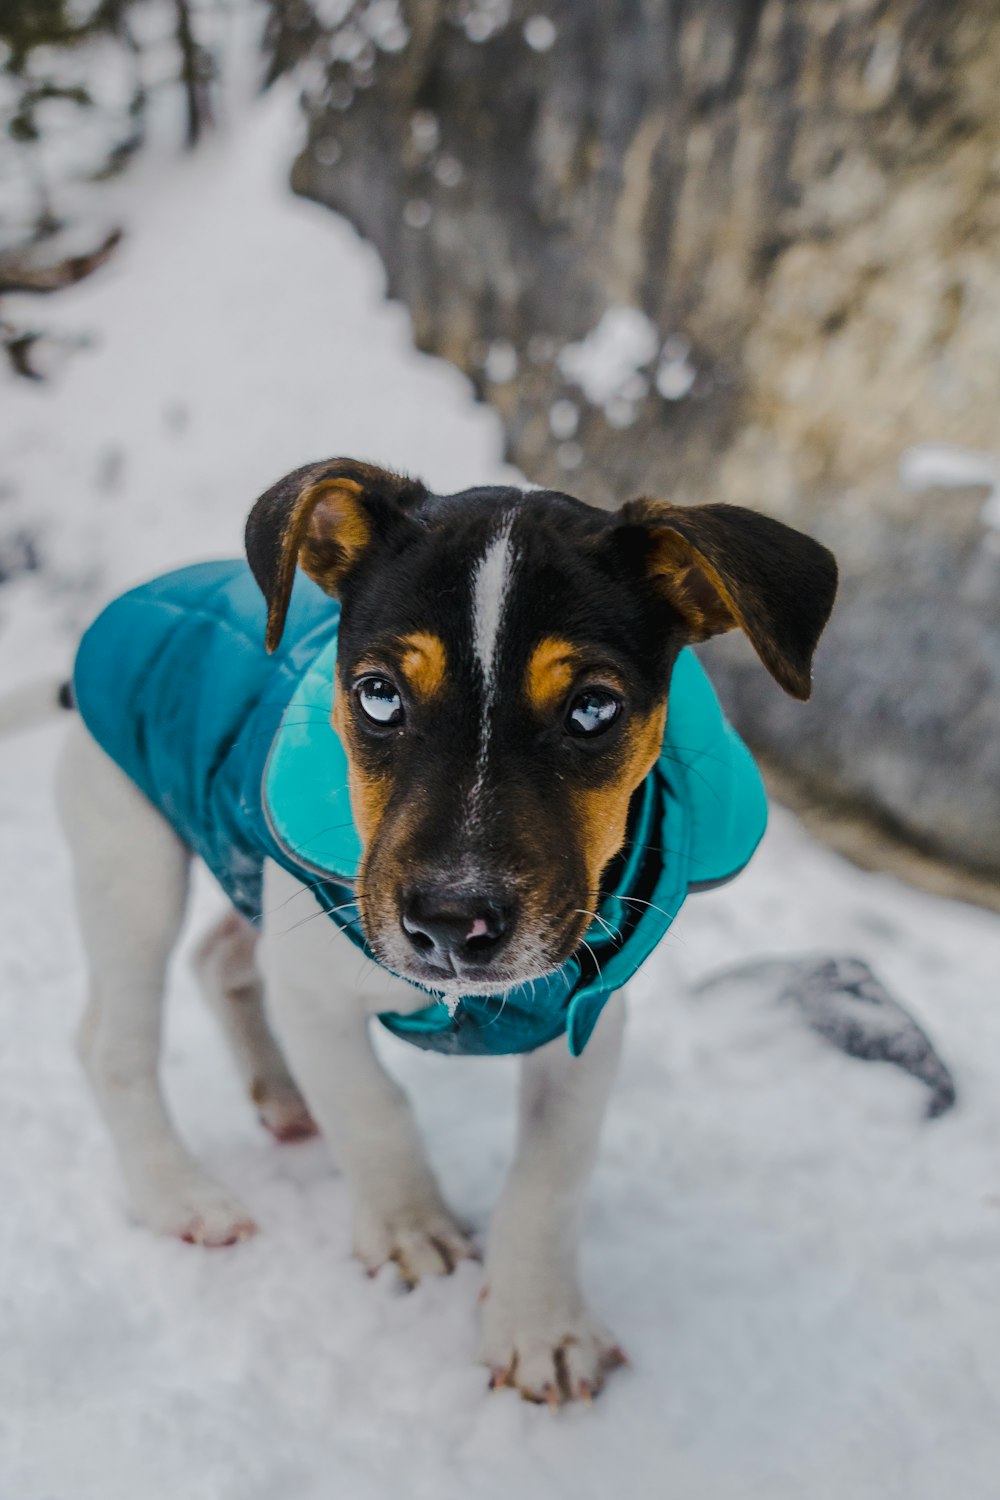 a small dog wearing a blue jacket in the snow